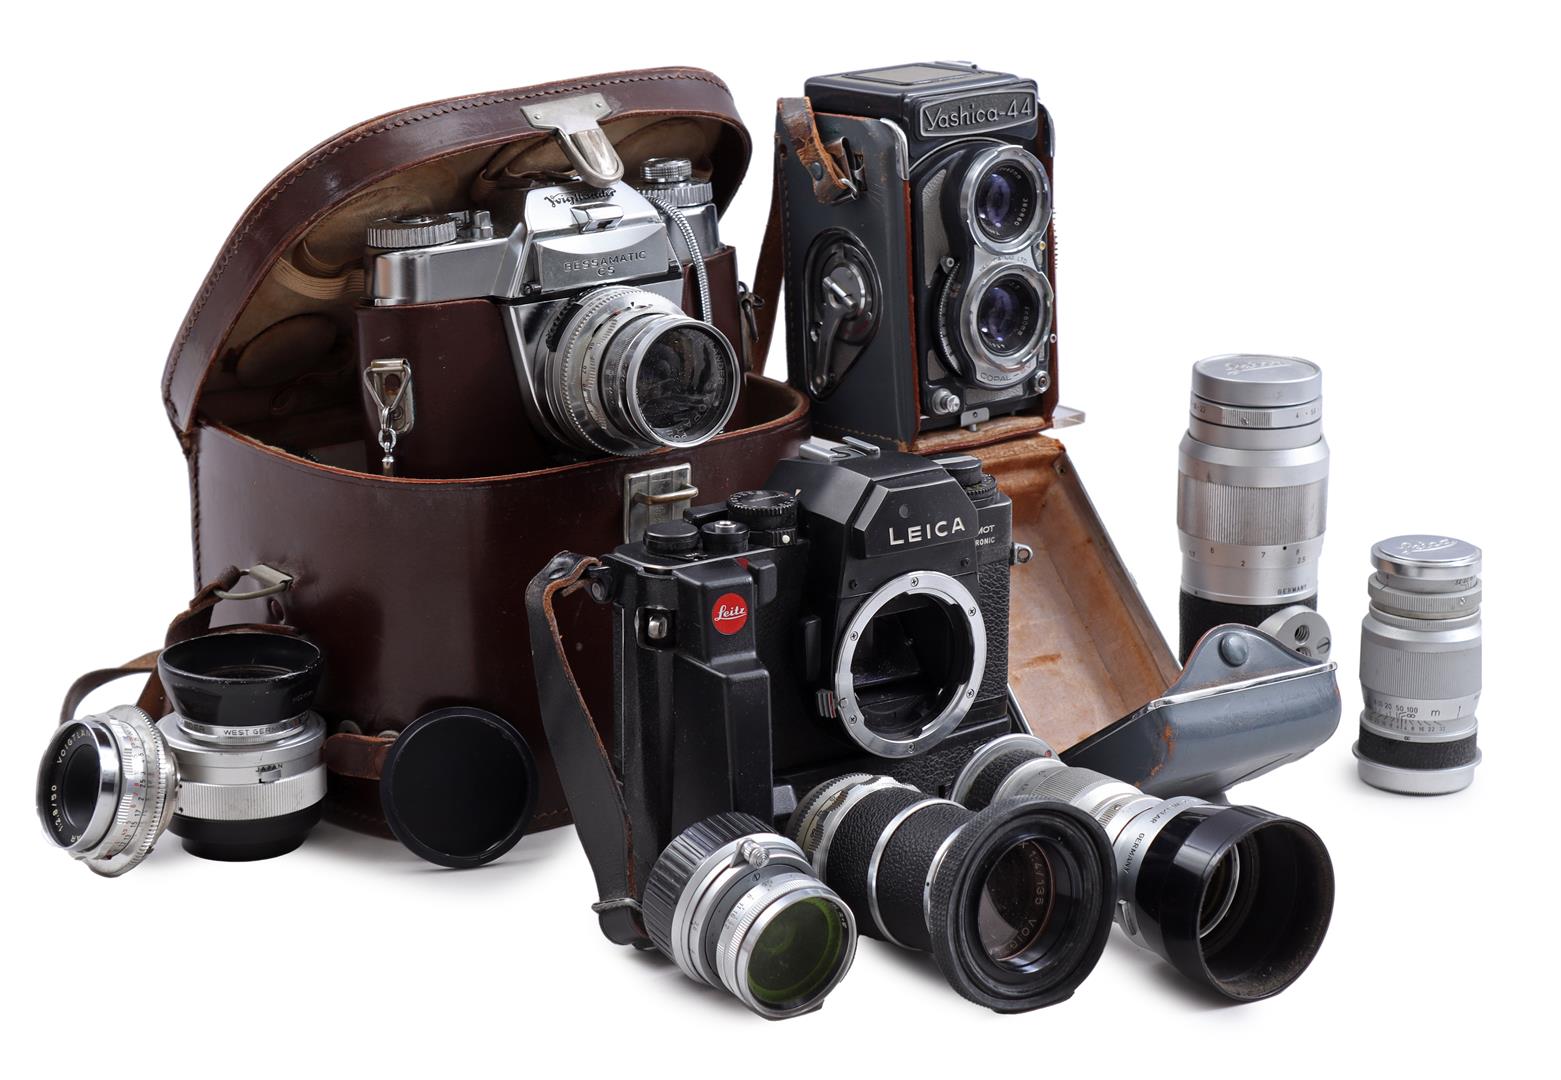 Lot various cameras and lenses